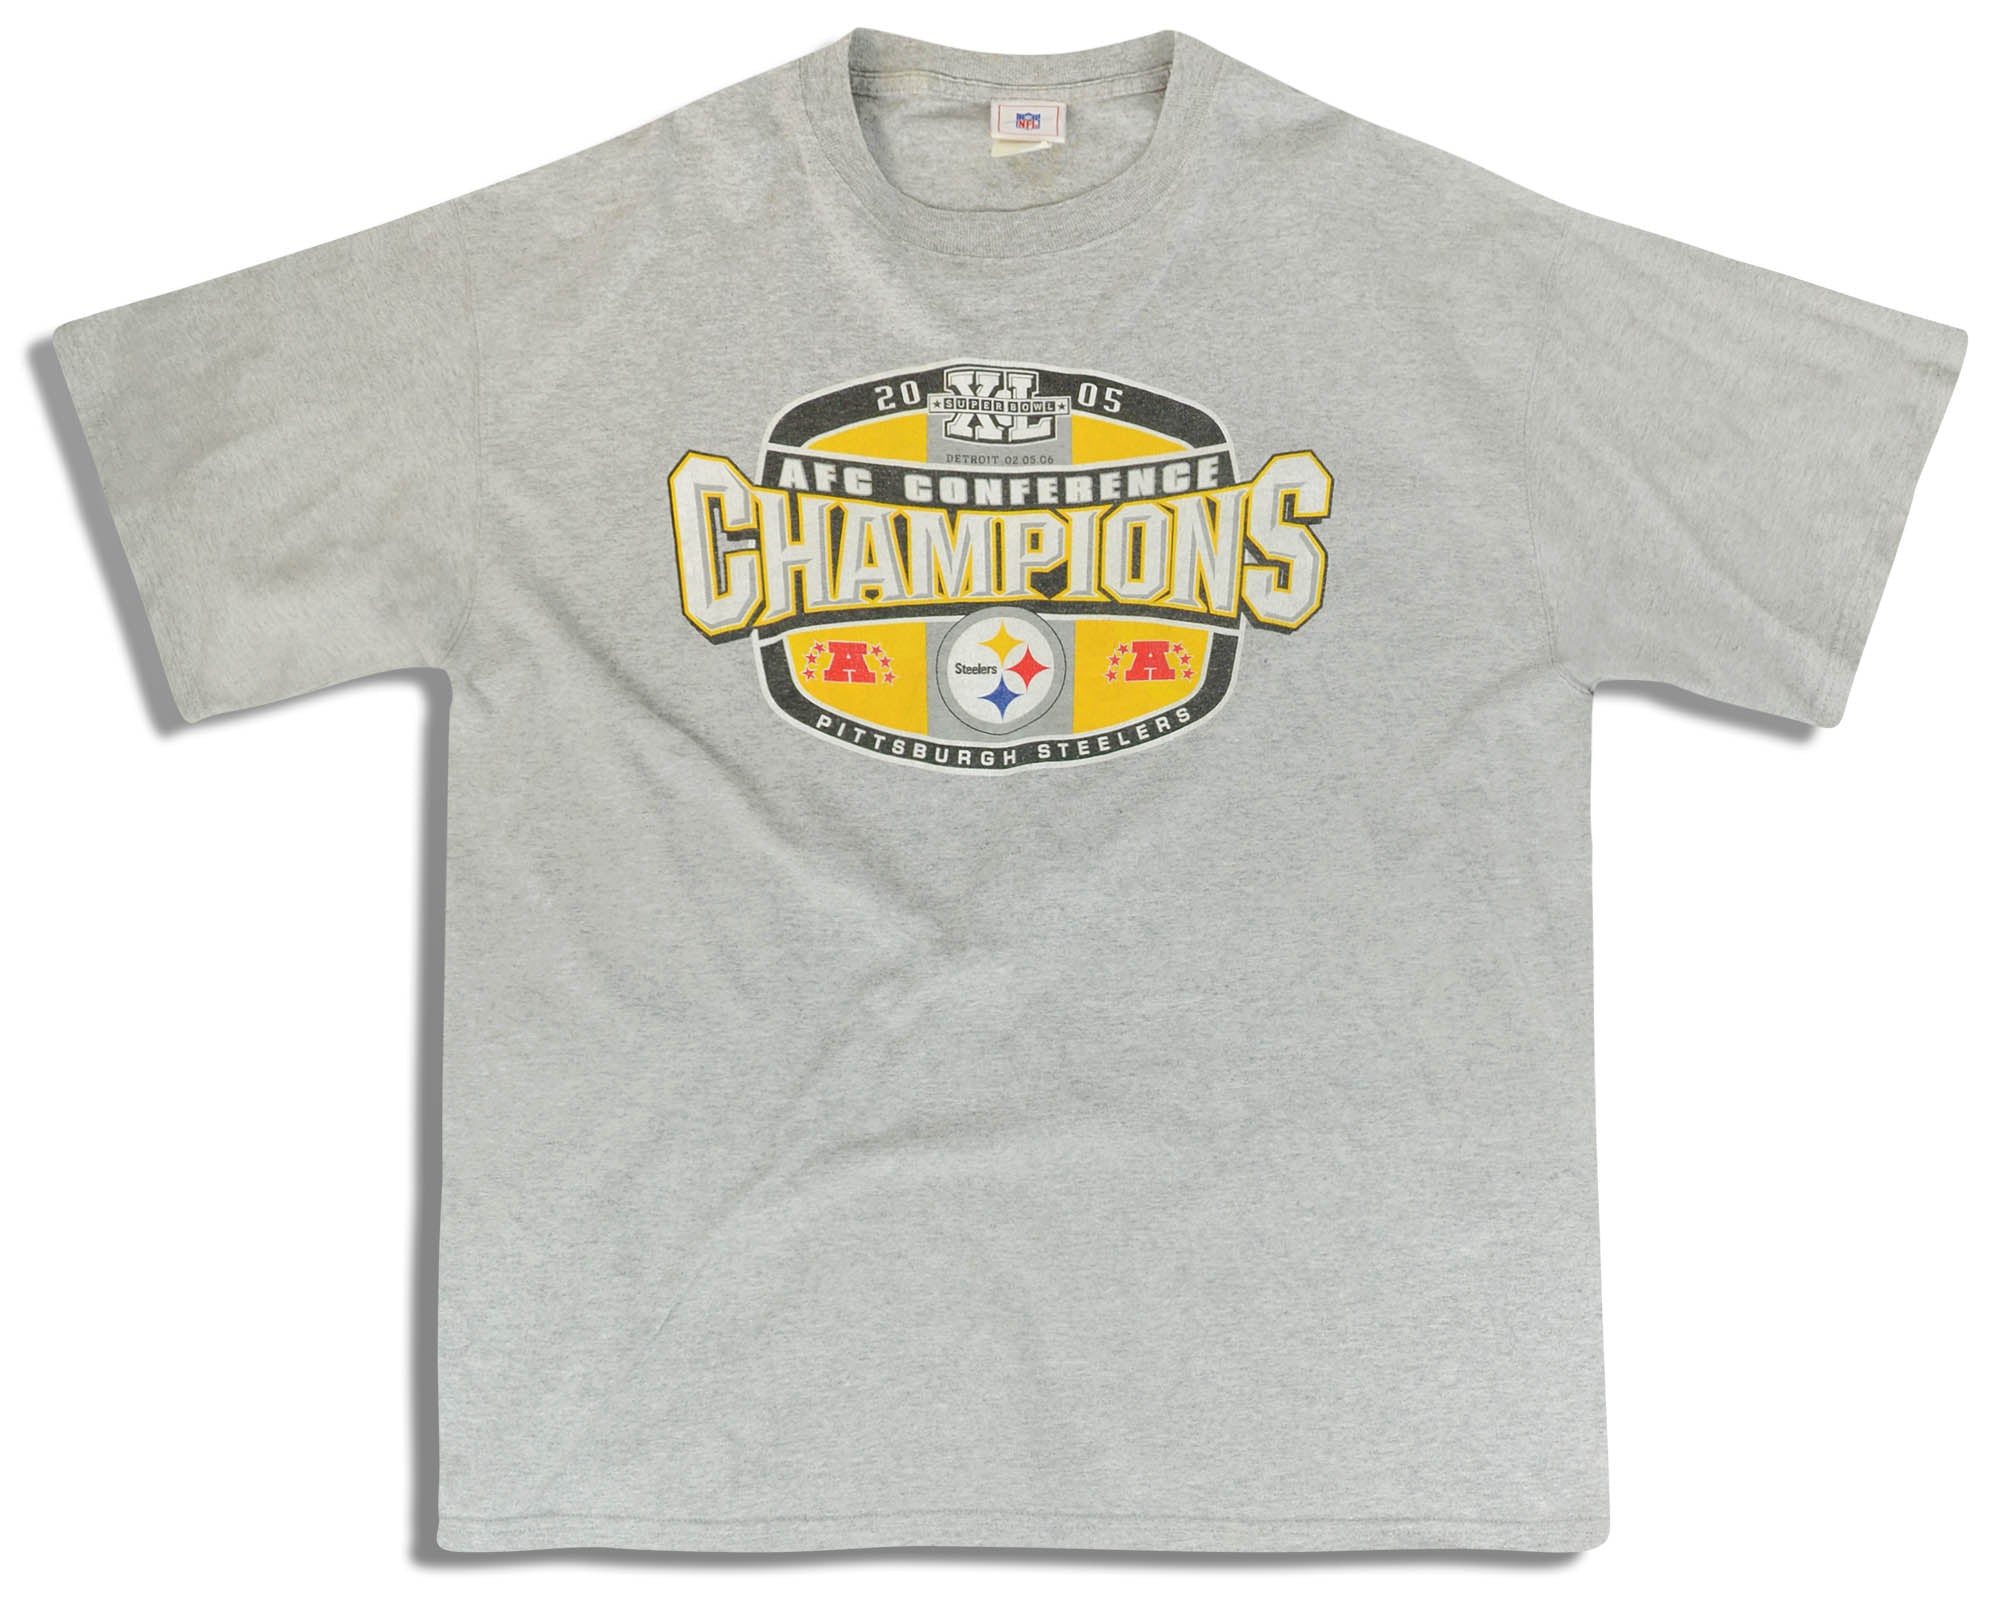 2005 PITTSBURGH STEELERS AFC CONFERENCE CHAMPIONS GRAPHIC TEE XL